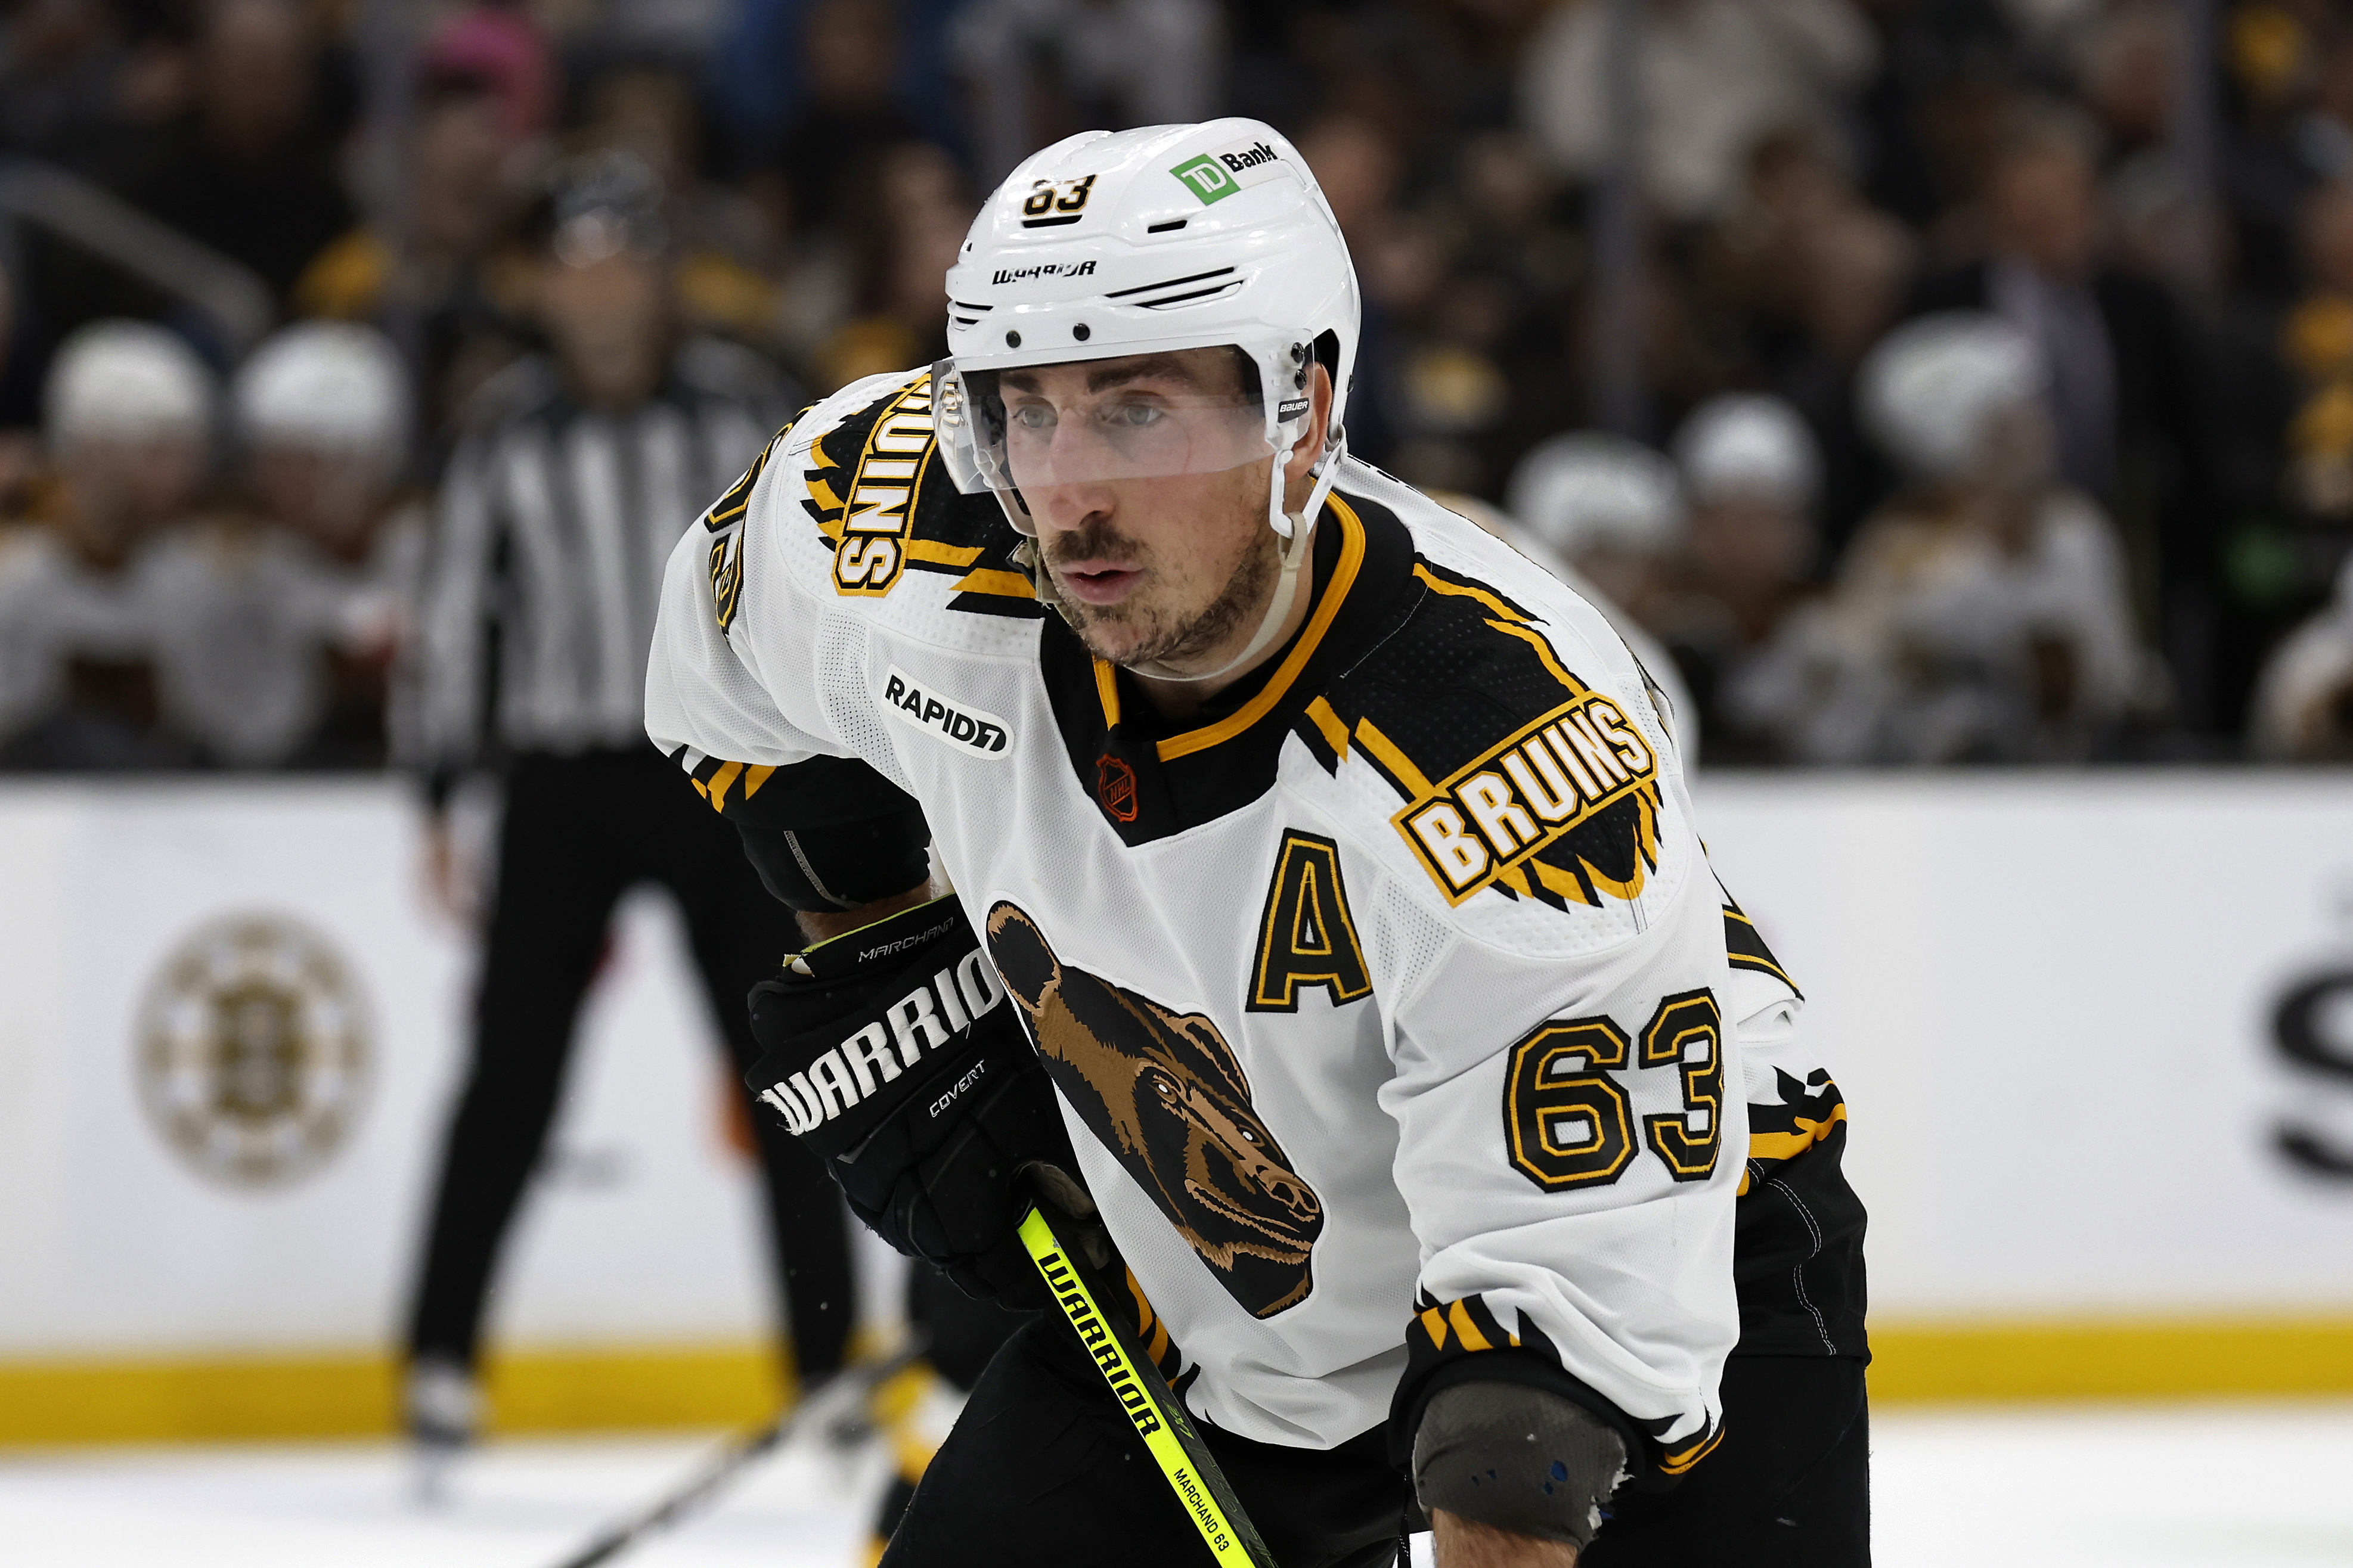 Boston Bruins winger Brad Marchand wants to build on last year's